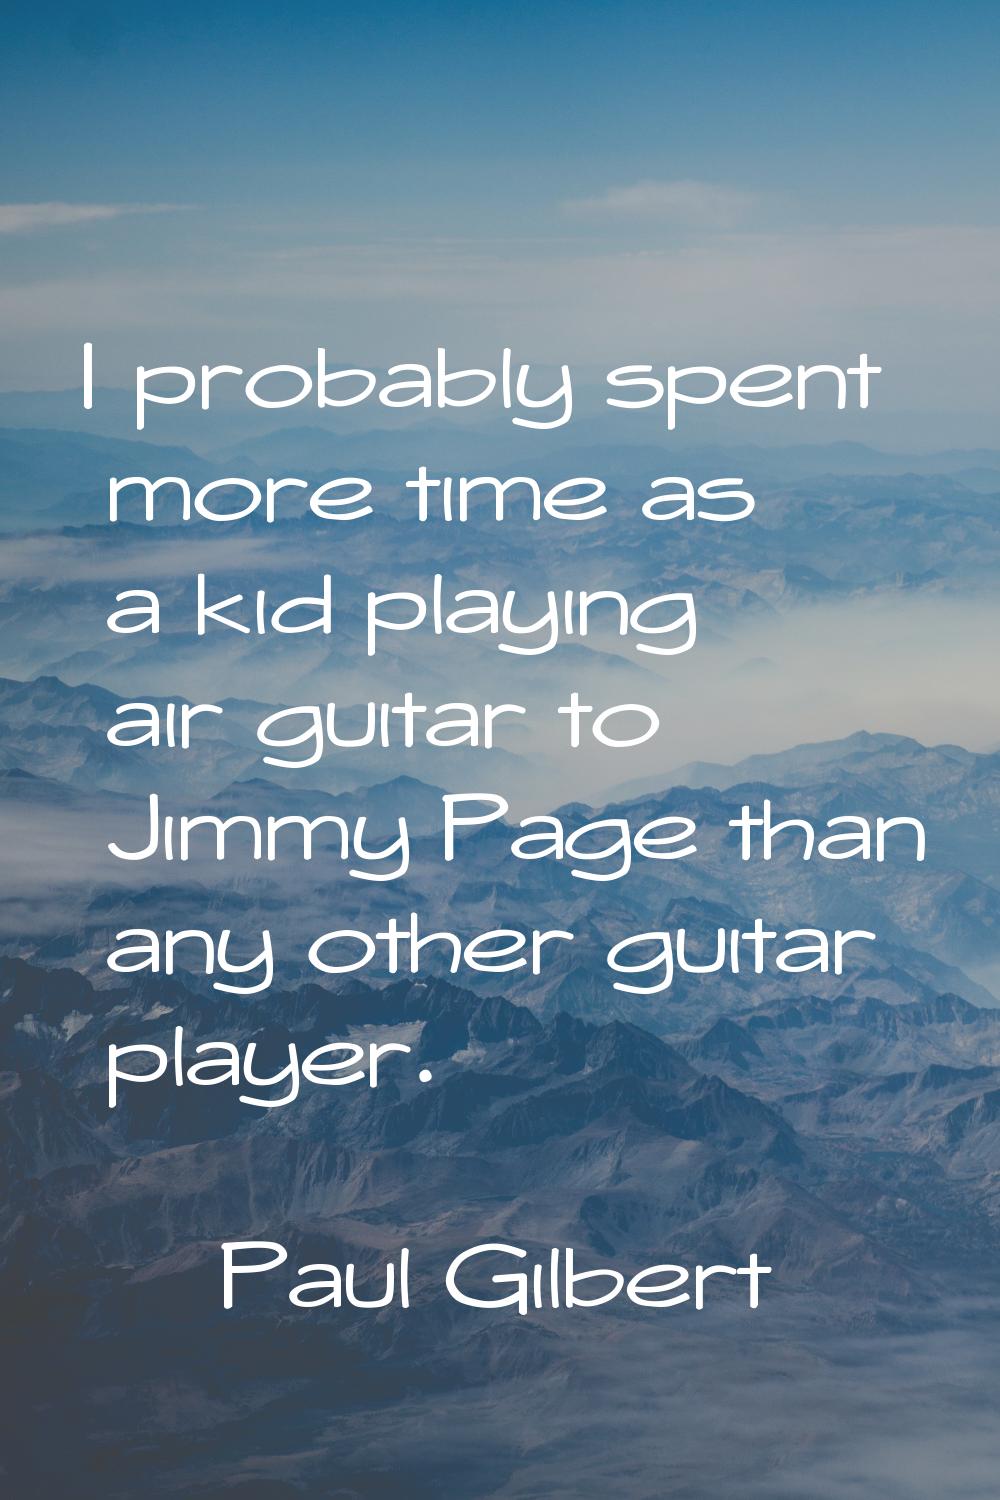 I probably spent more time as a kid playing air guitar to Jimmy Page than any other guitar player.